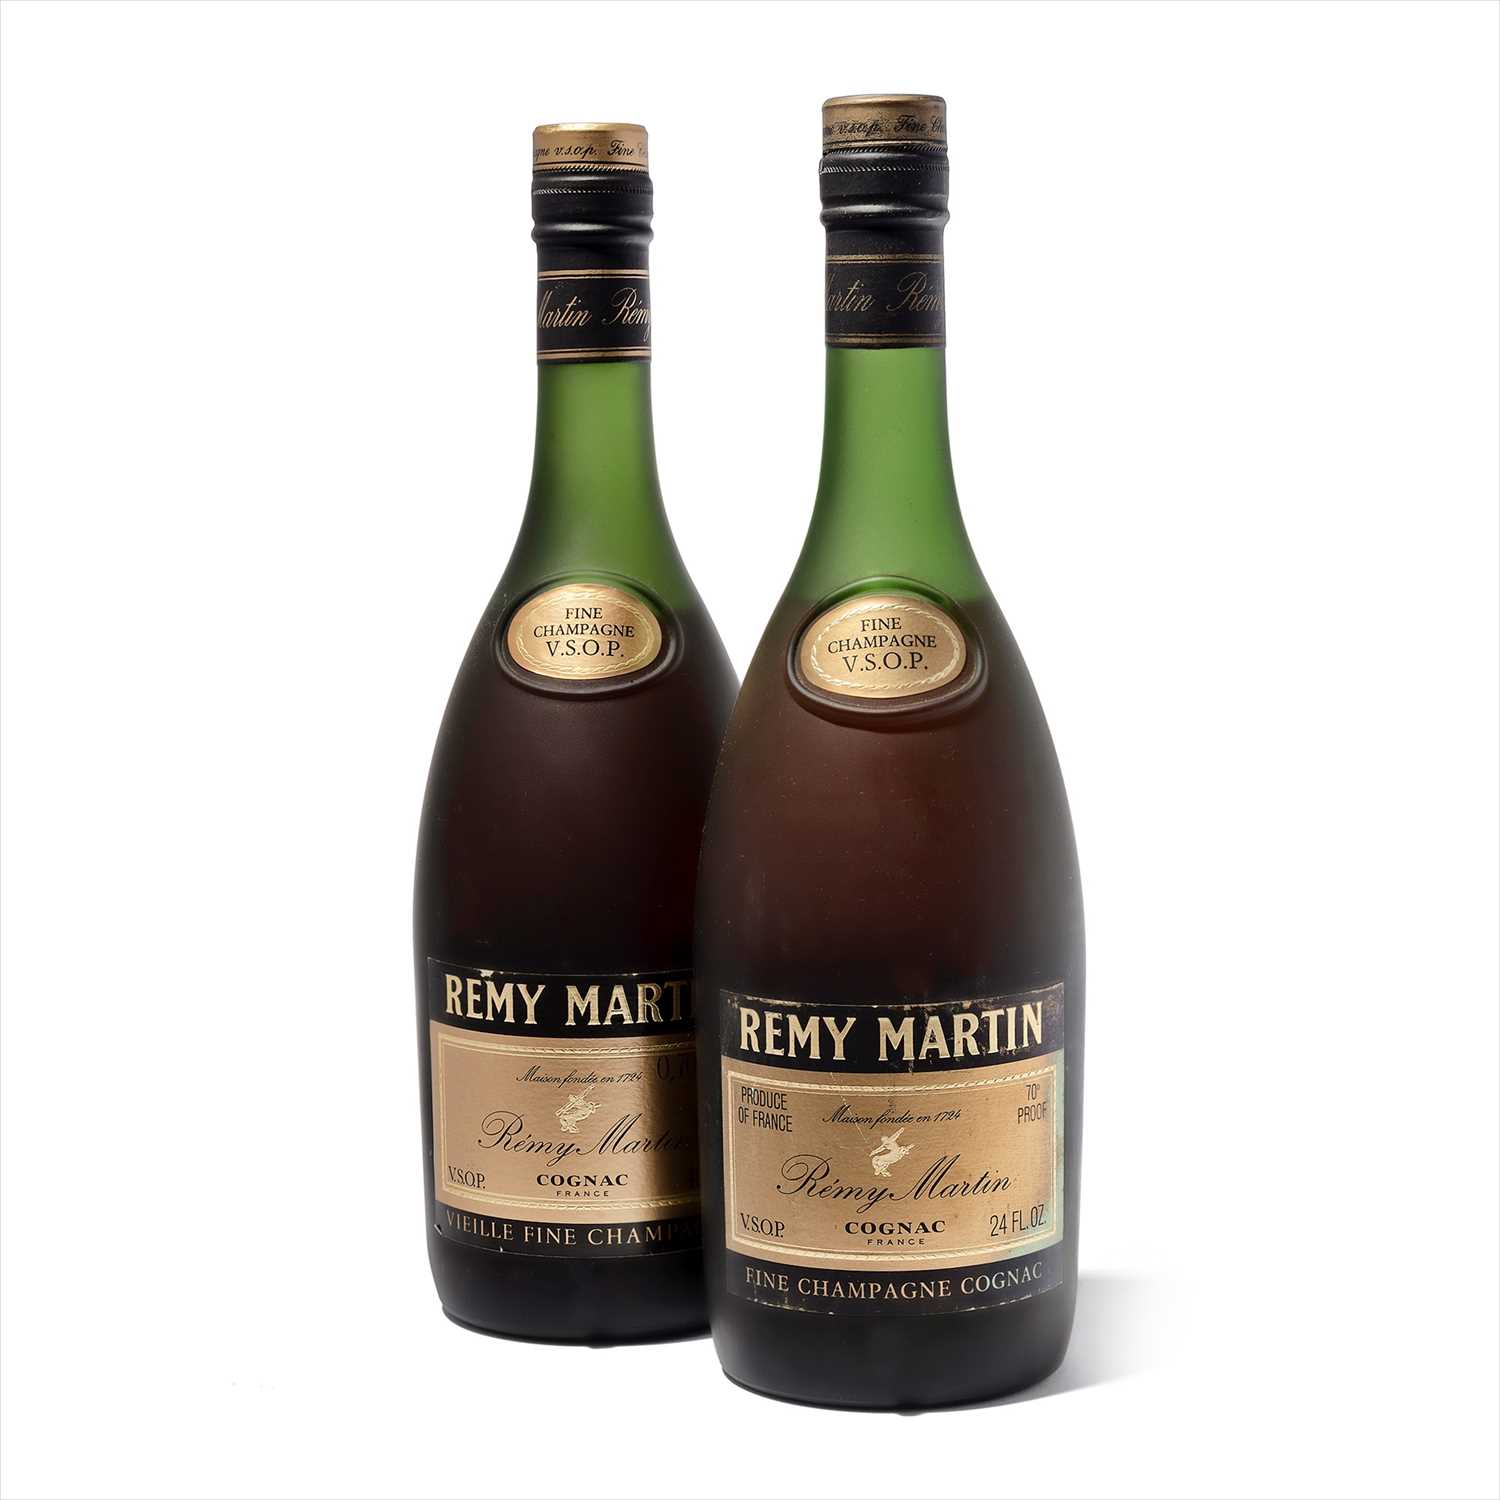 Lot 256 - 6 bottles Remy Martin VSOP Believed 1980s and 1990s